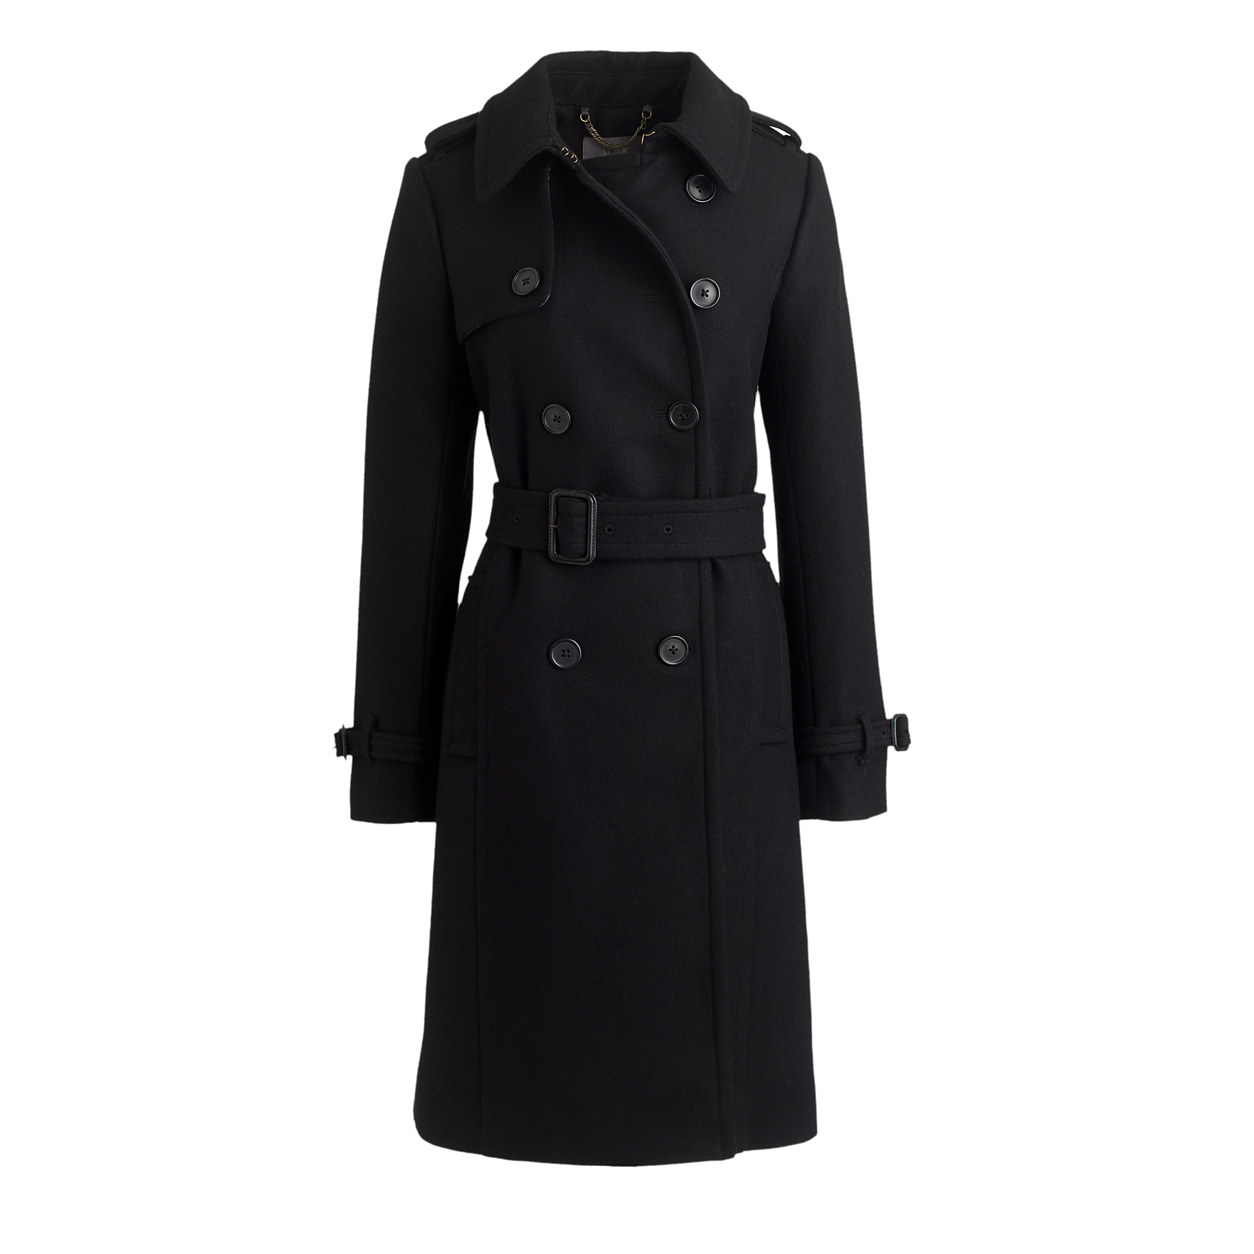 J.Crew Icon Trench in Wool-Cashmere Black